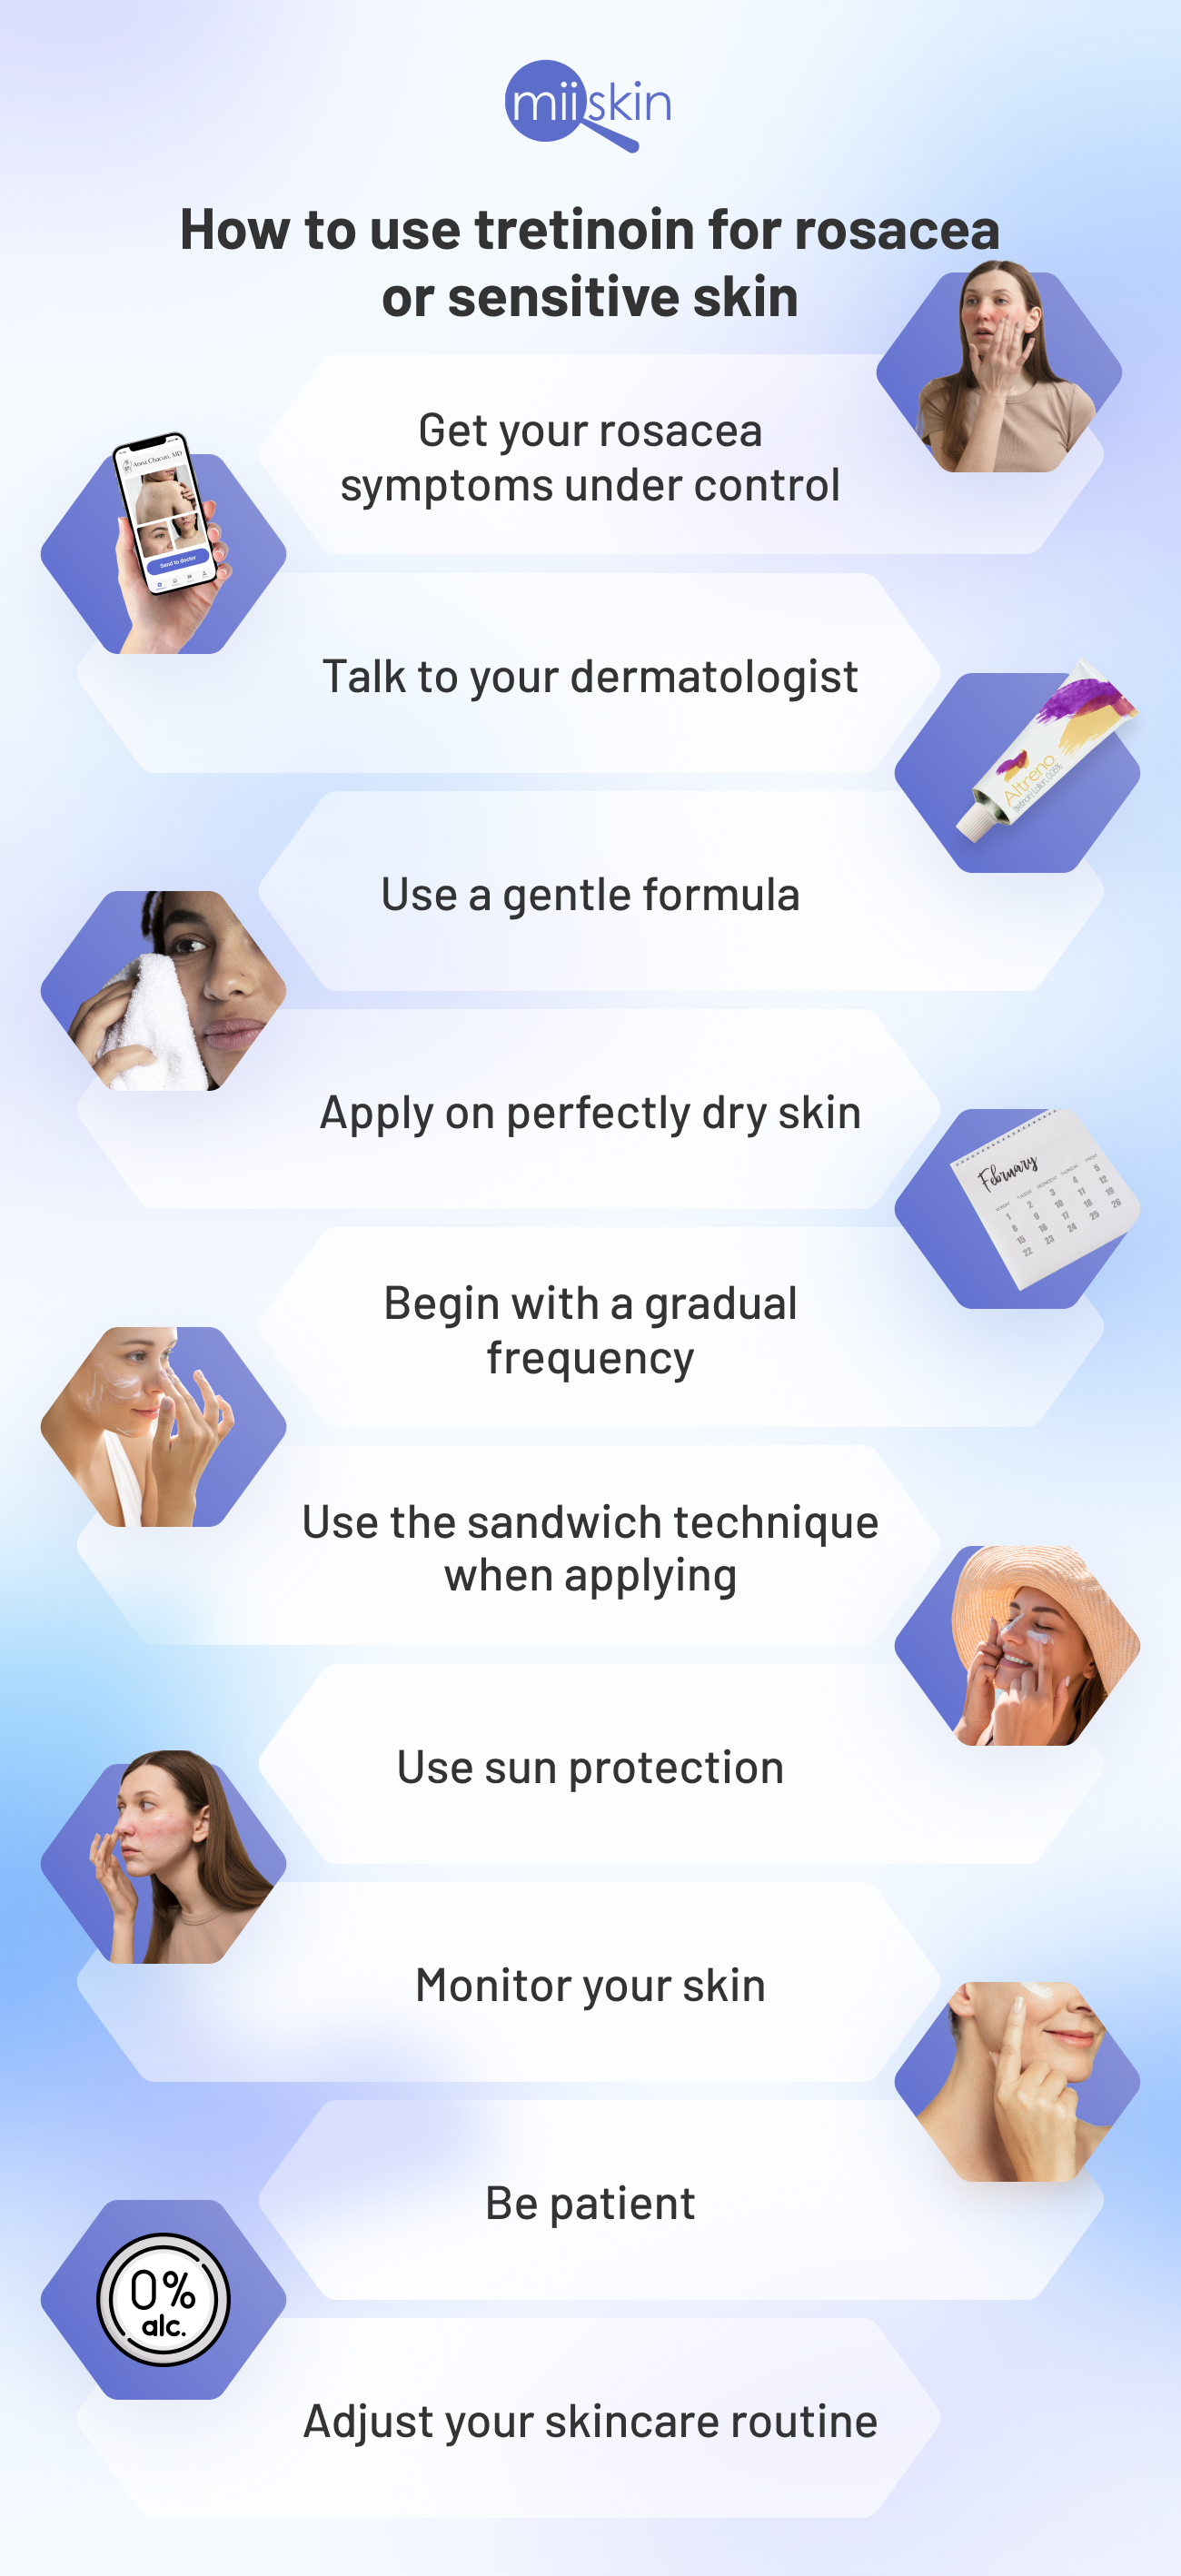 step by step guide on how to use tretinoin if you have rosacea